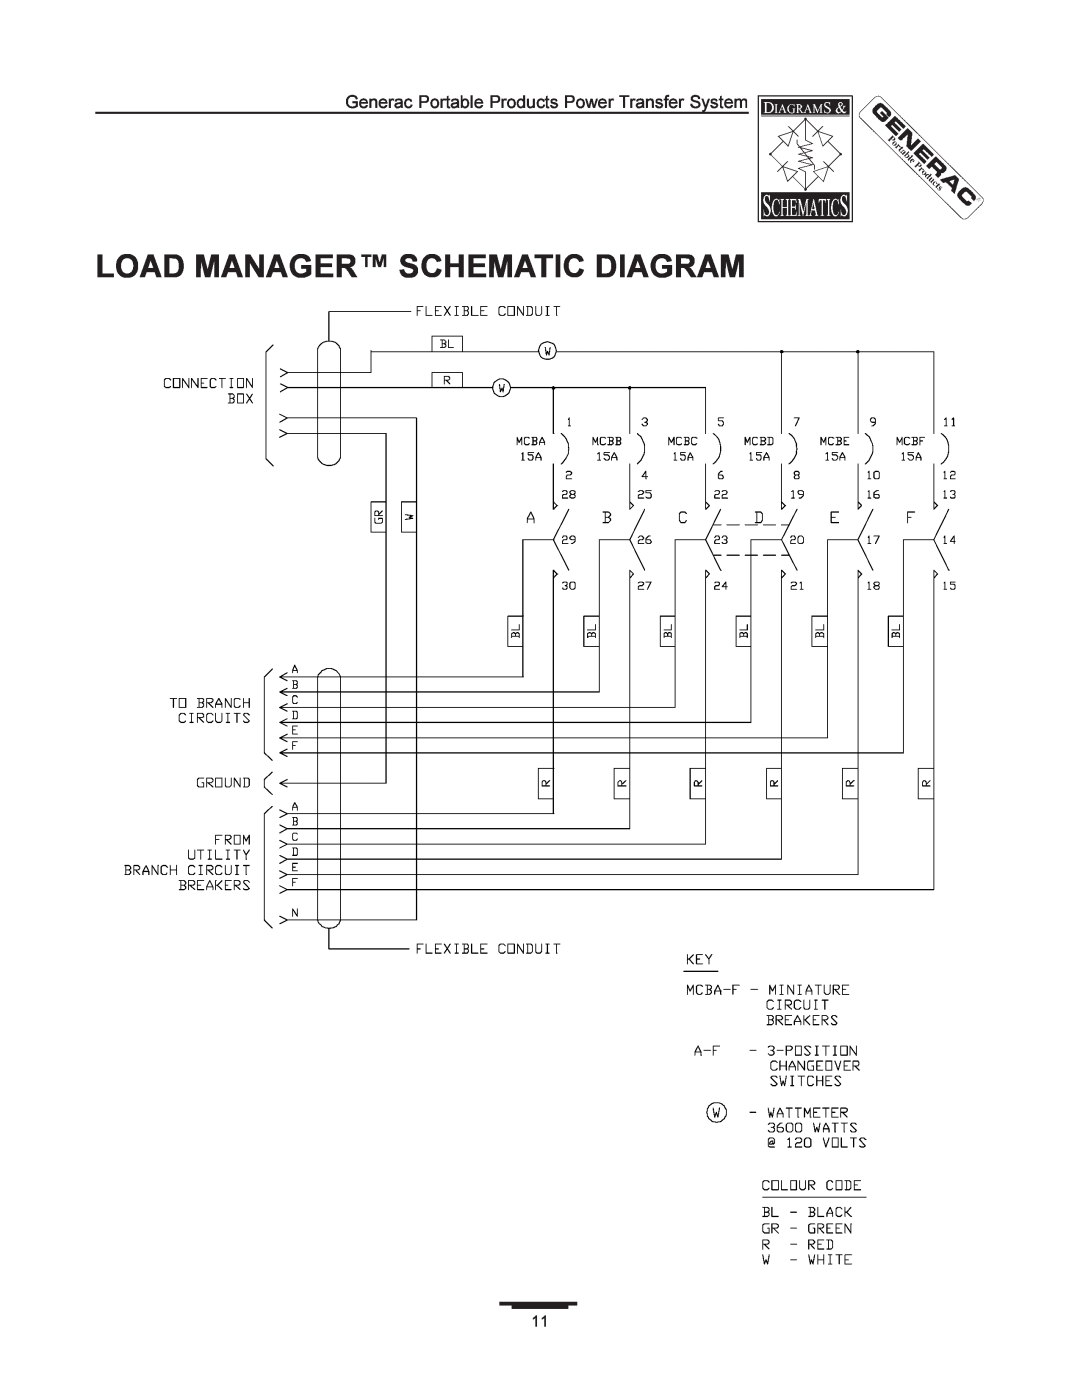 Generac 1403-0 manual Load Manager Schematic Diagram, Generac Portable Products Power Transfer System 